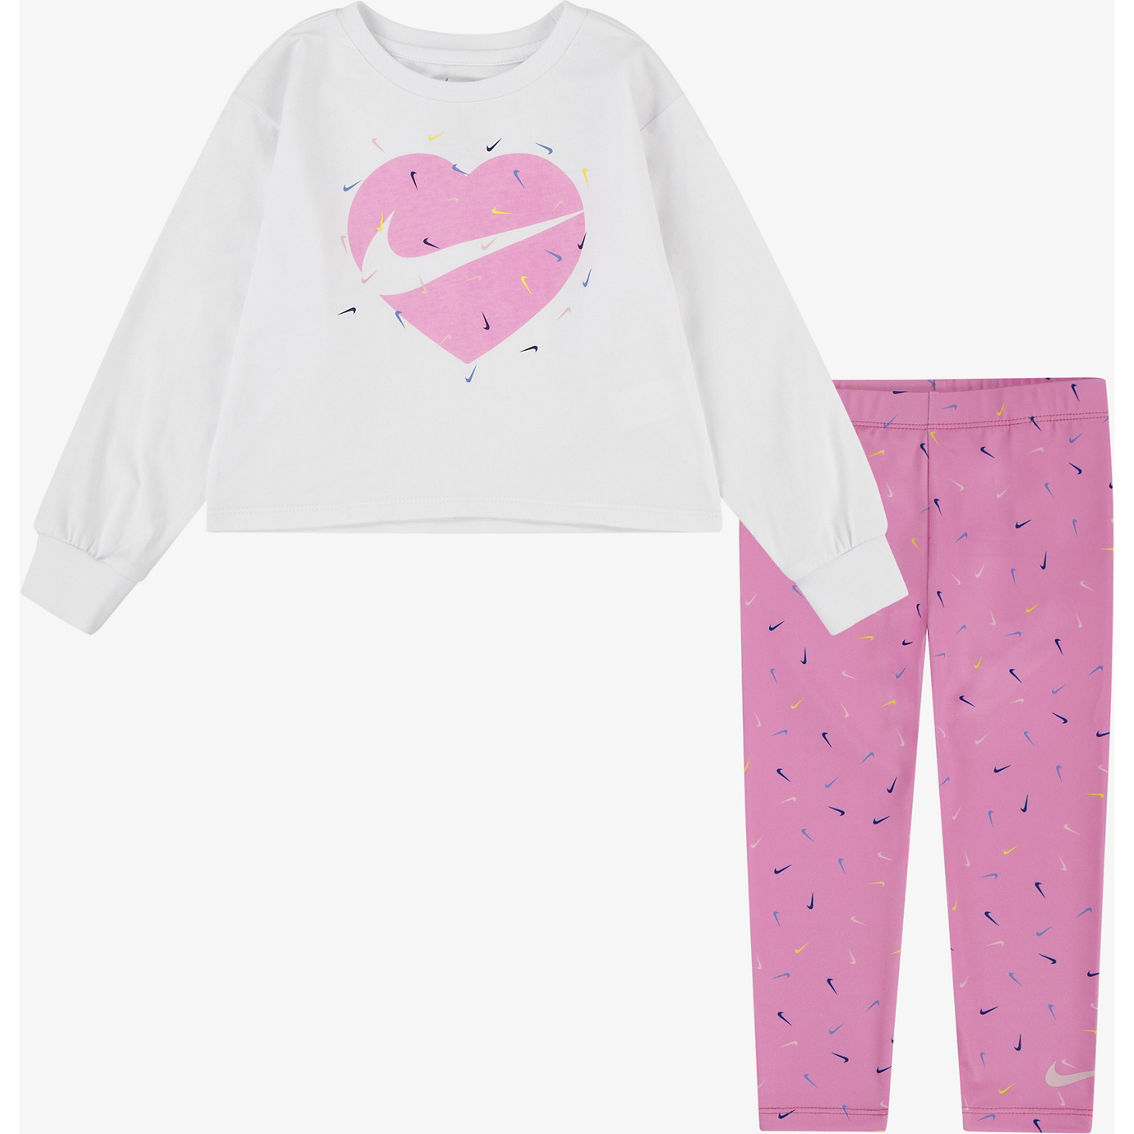 Nike Toddler Girl's All Over Print Long Sleeve Tee and Legging Set - Image 1 of 3